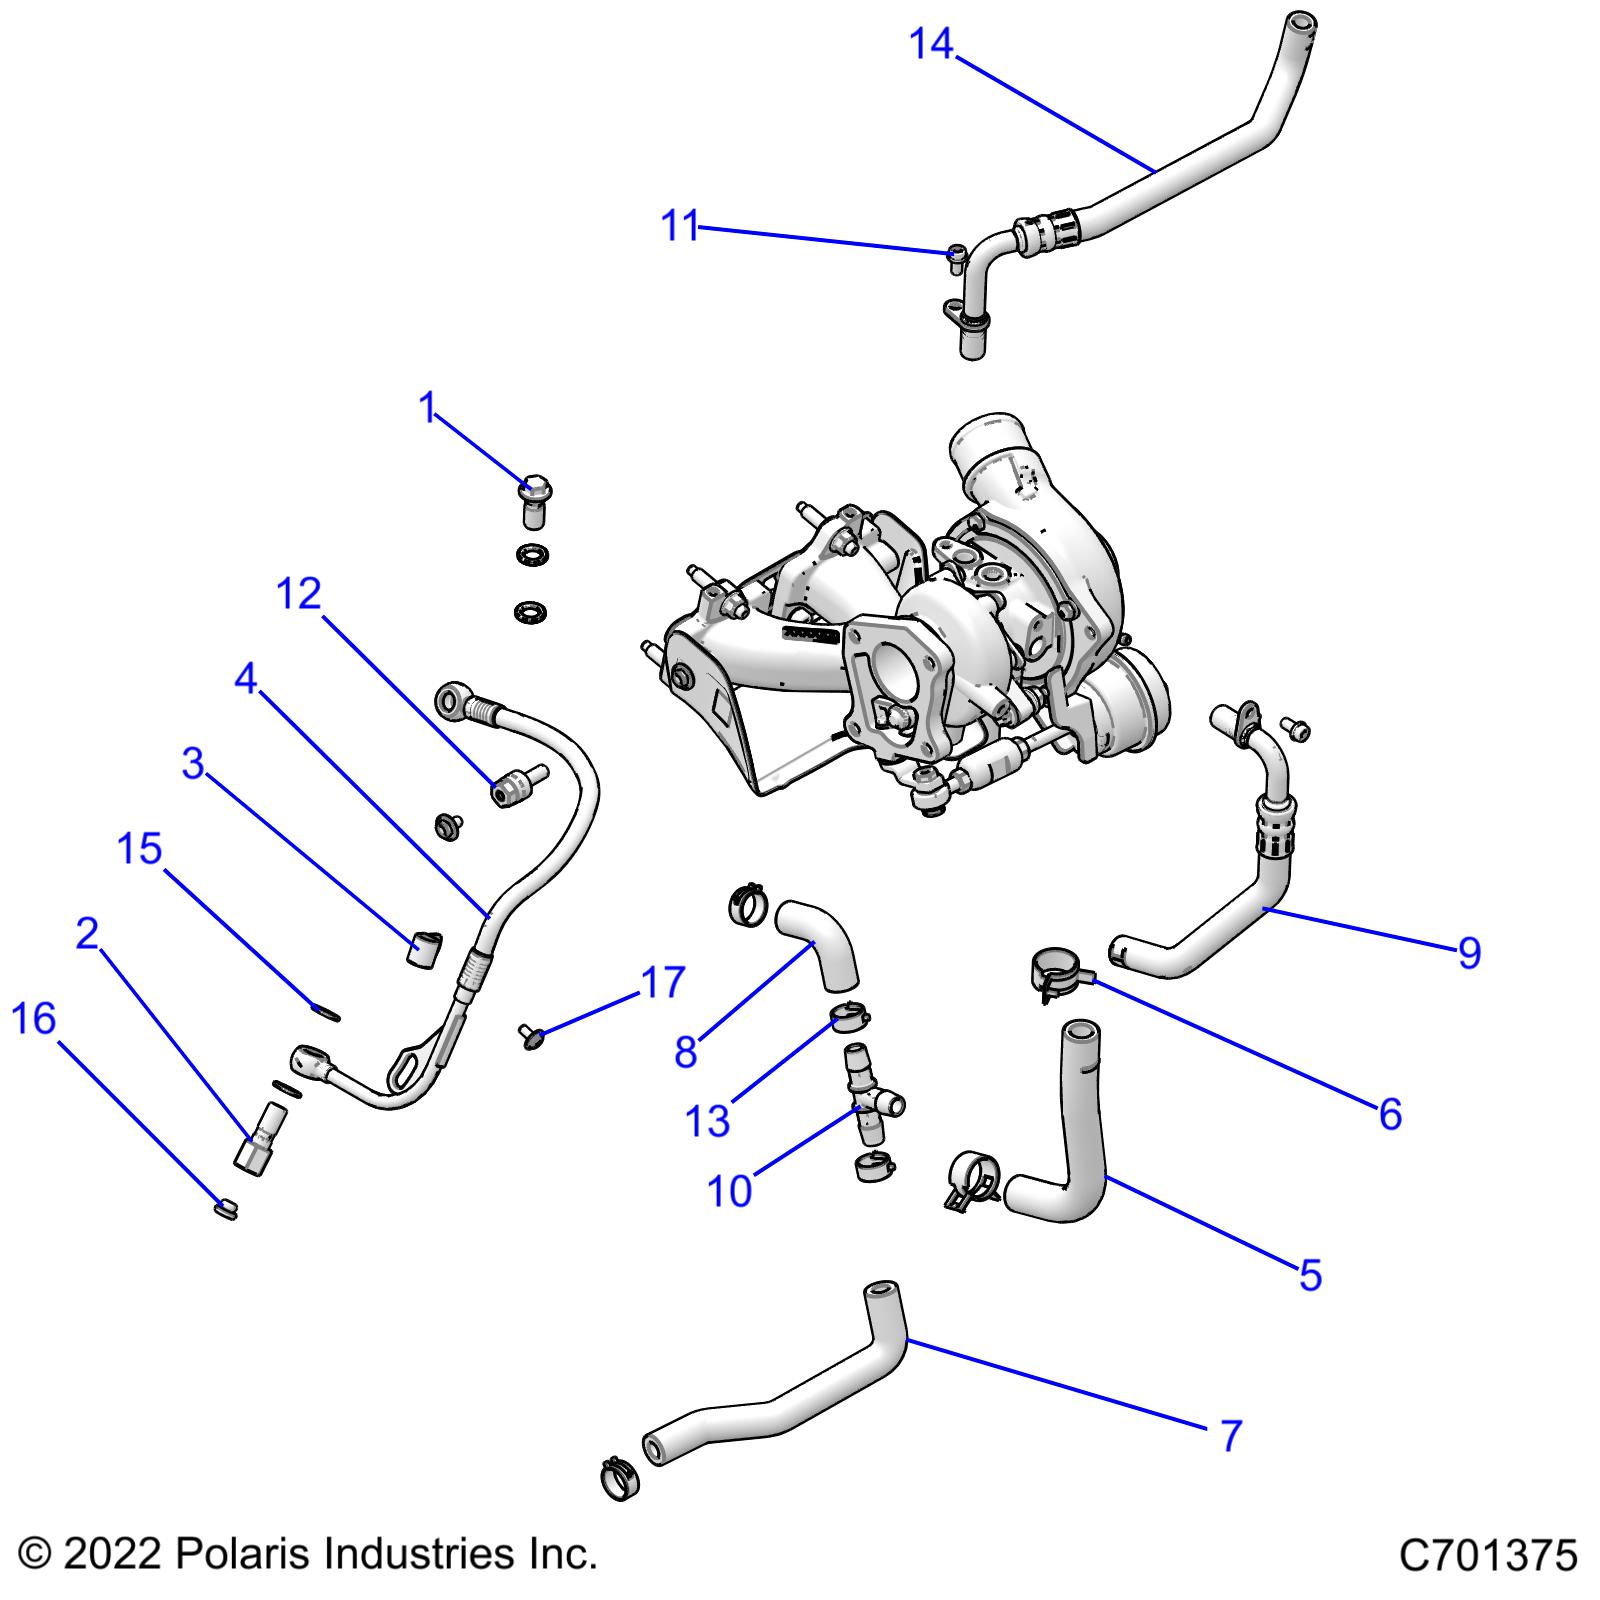 Part Number : 2522043 COOLANT LINE ASSEMBLY